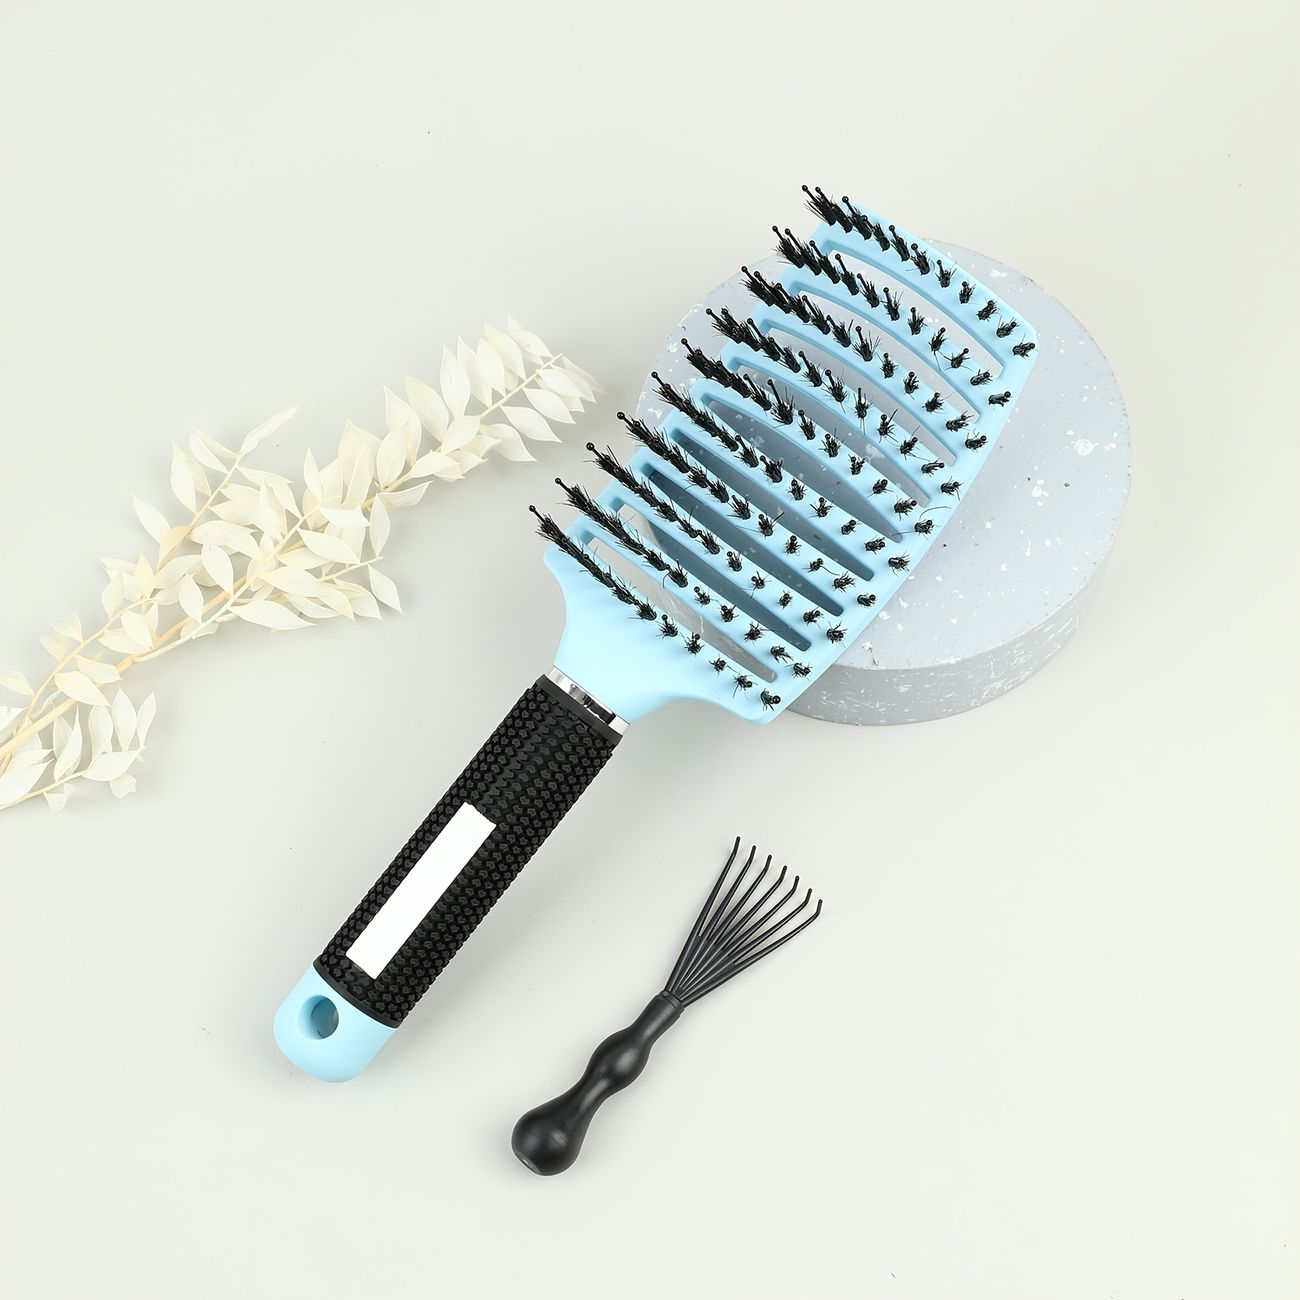 Boar Bristle Hair Brush Curved Vented Styling Hairbrush Faster Blow Drying  Paddle Detangler Brush For Wet Dry Curly Thick Hair Smoothing Massaging  Detangling For Women Men Kids With Cleaning Brush Blue |